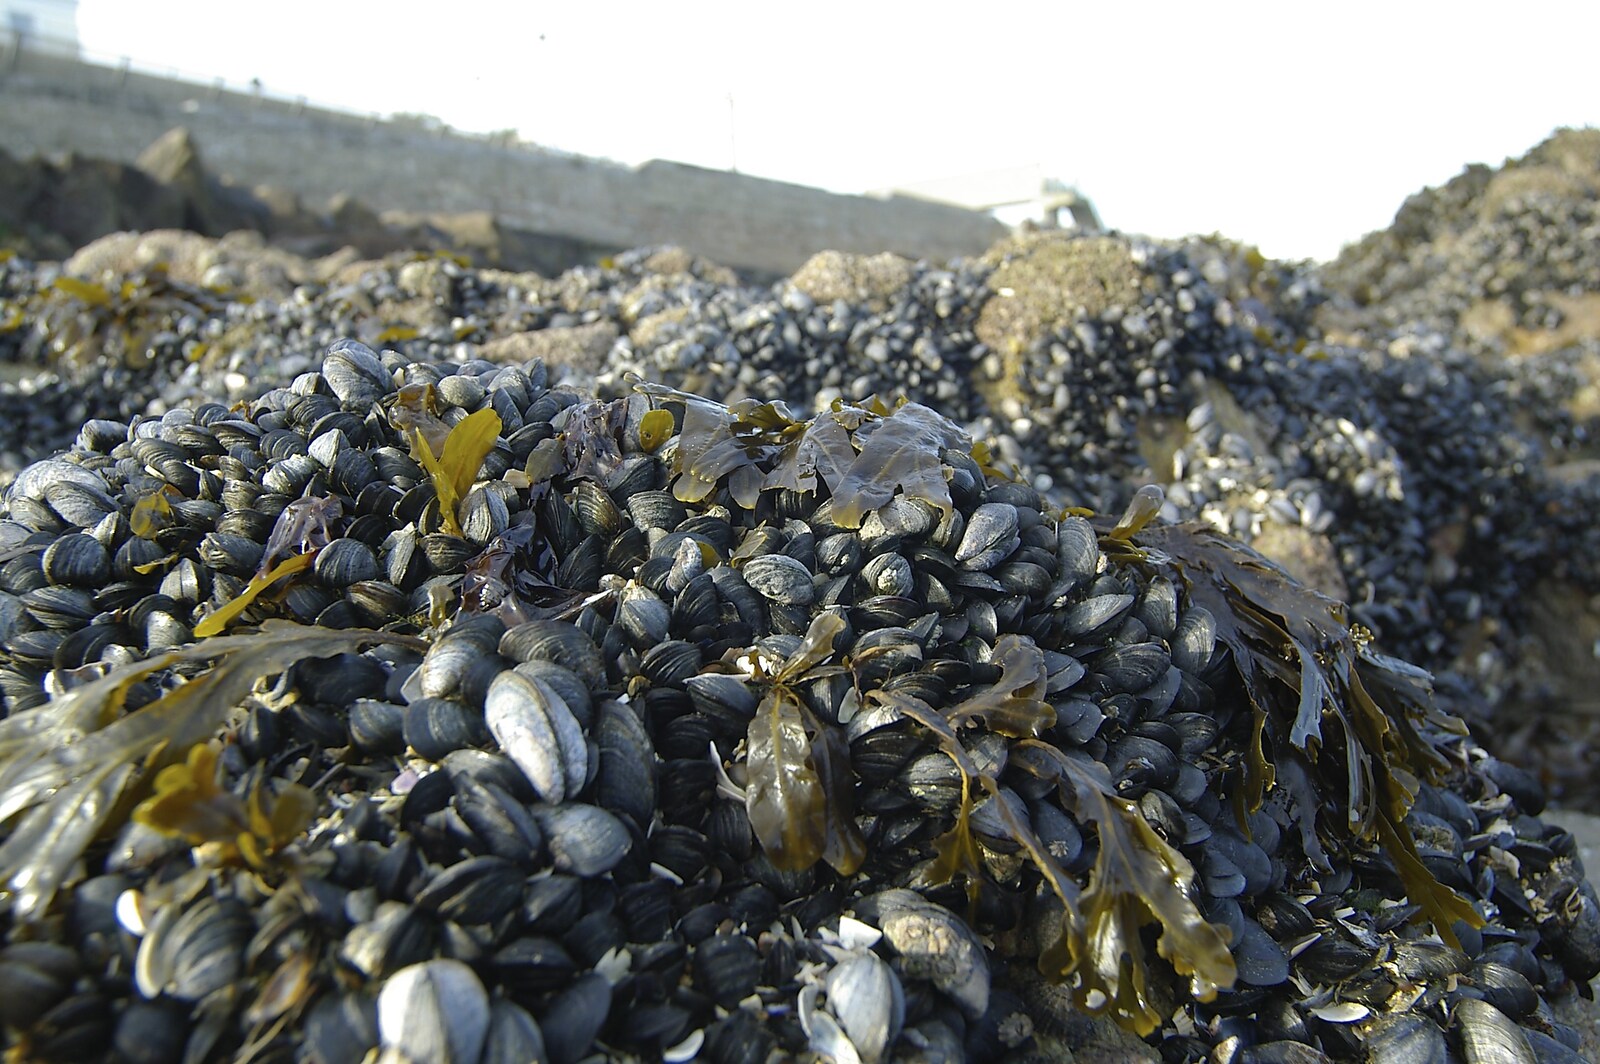 A pile of mussels from Blackrock Mornings, Dublin County, Ireland - 29th October 2006